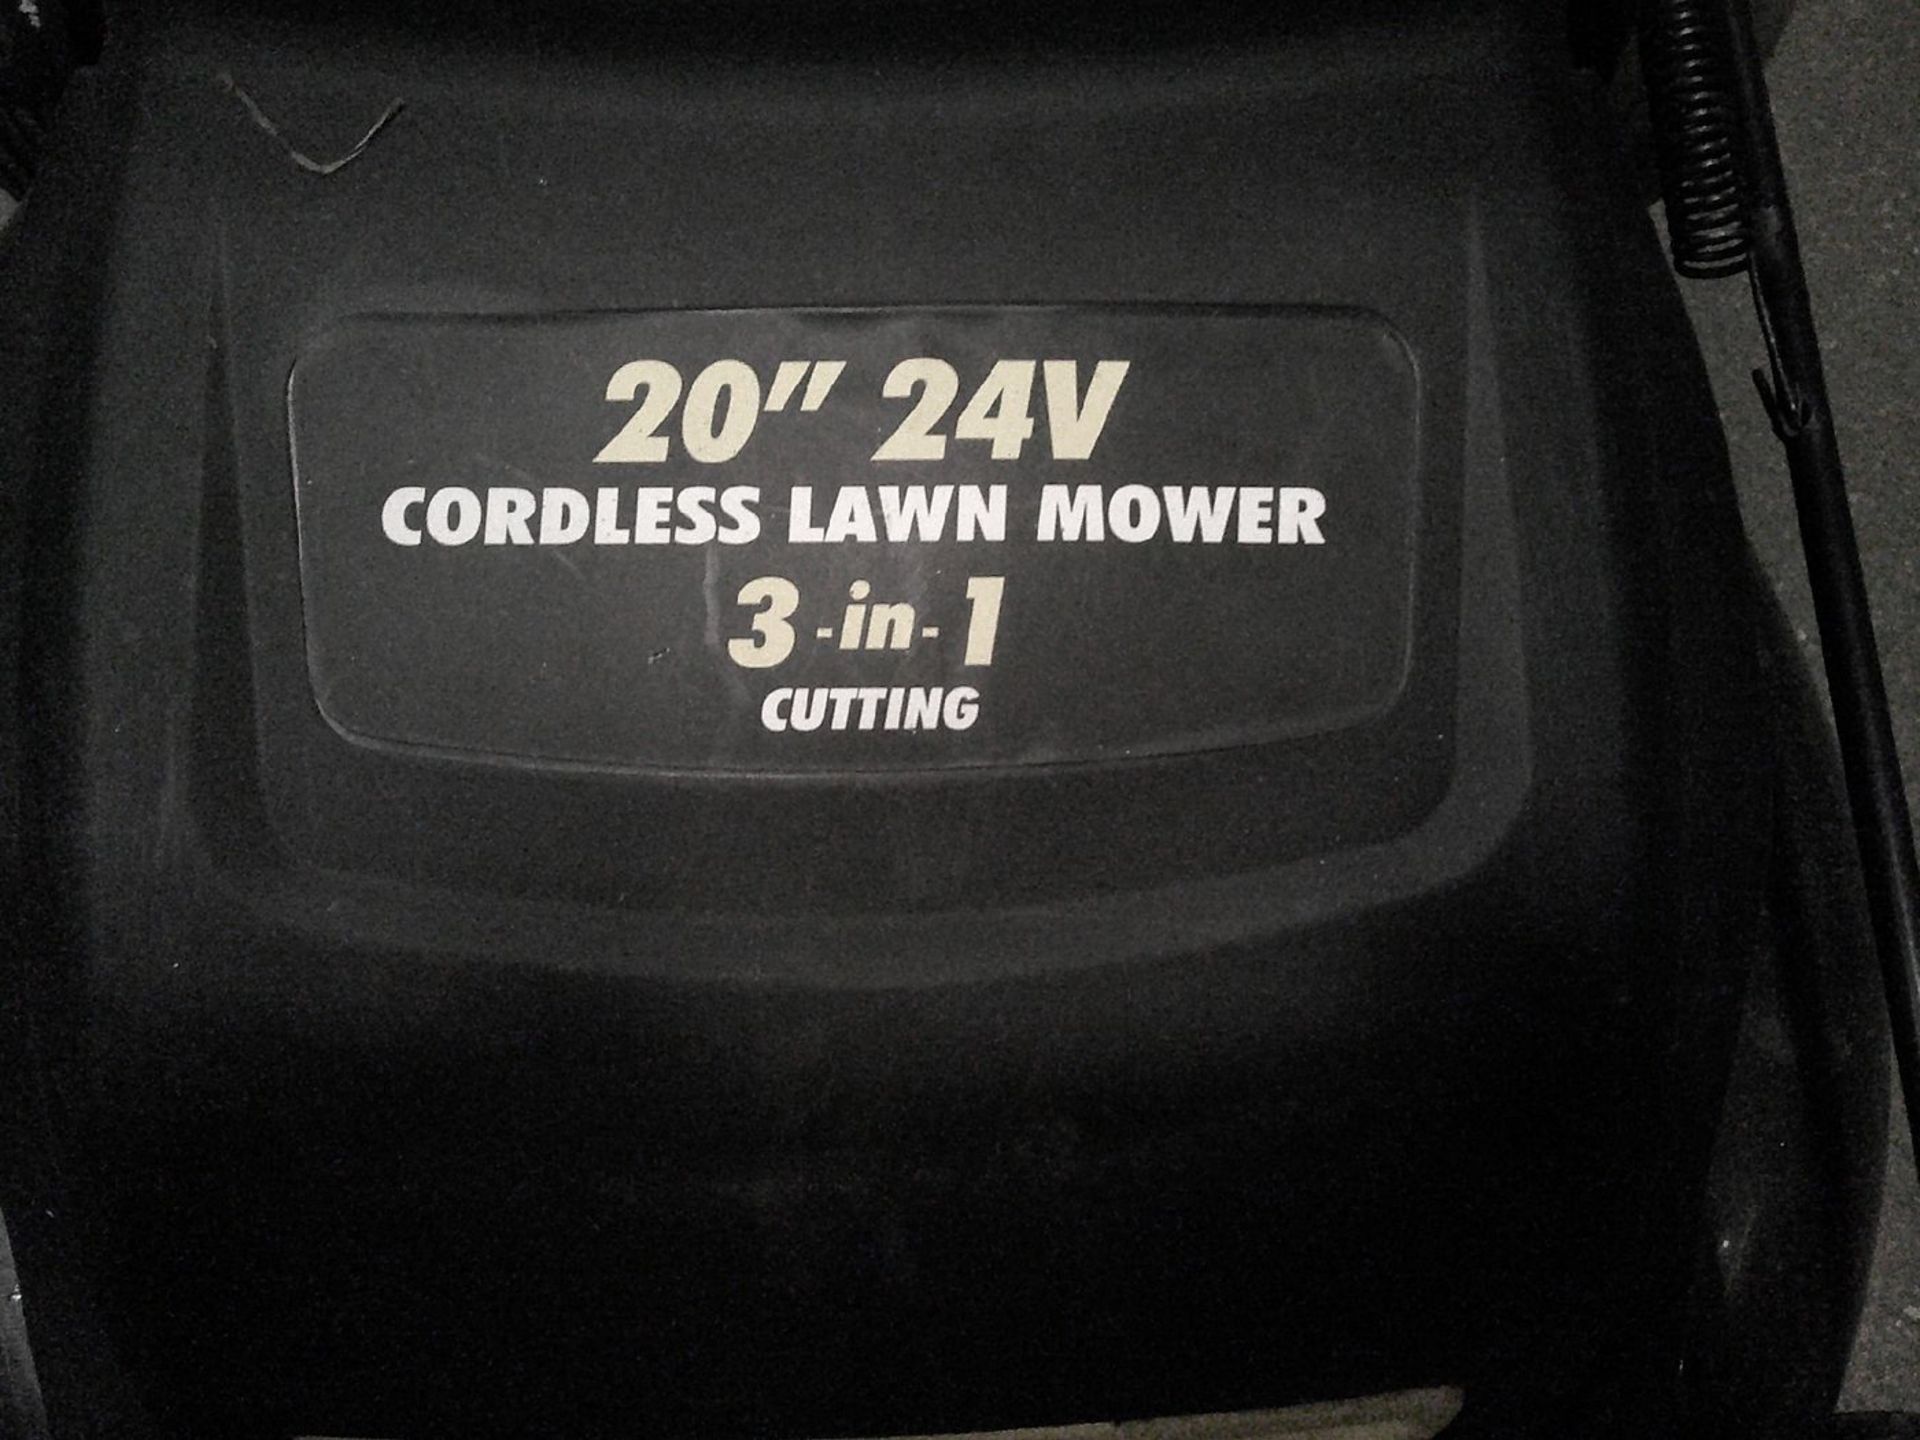 Yardworks 20 in. 24V Cordless Electric Lawn Mower; 3-in-1 Cutting - Image 3 of 3